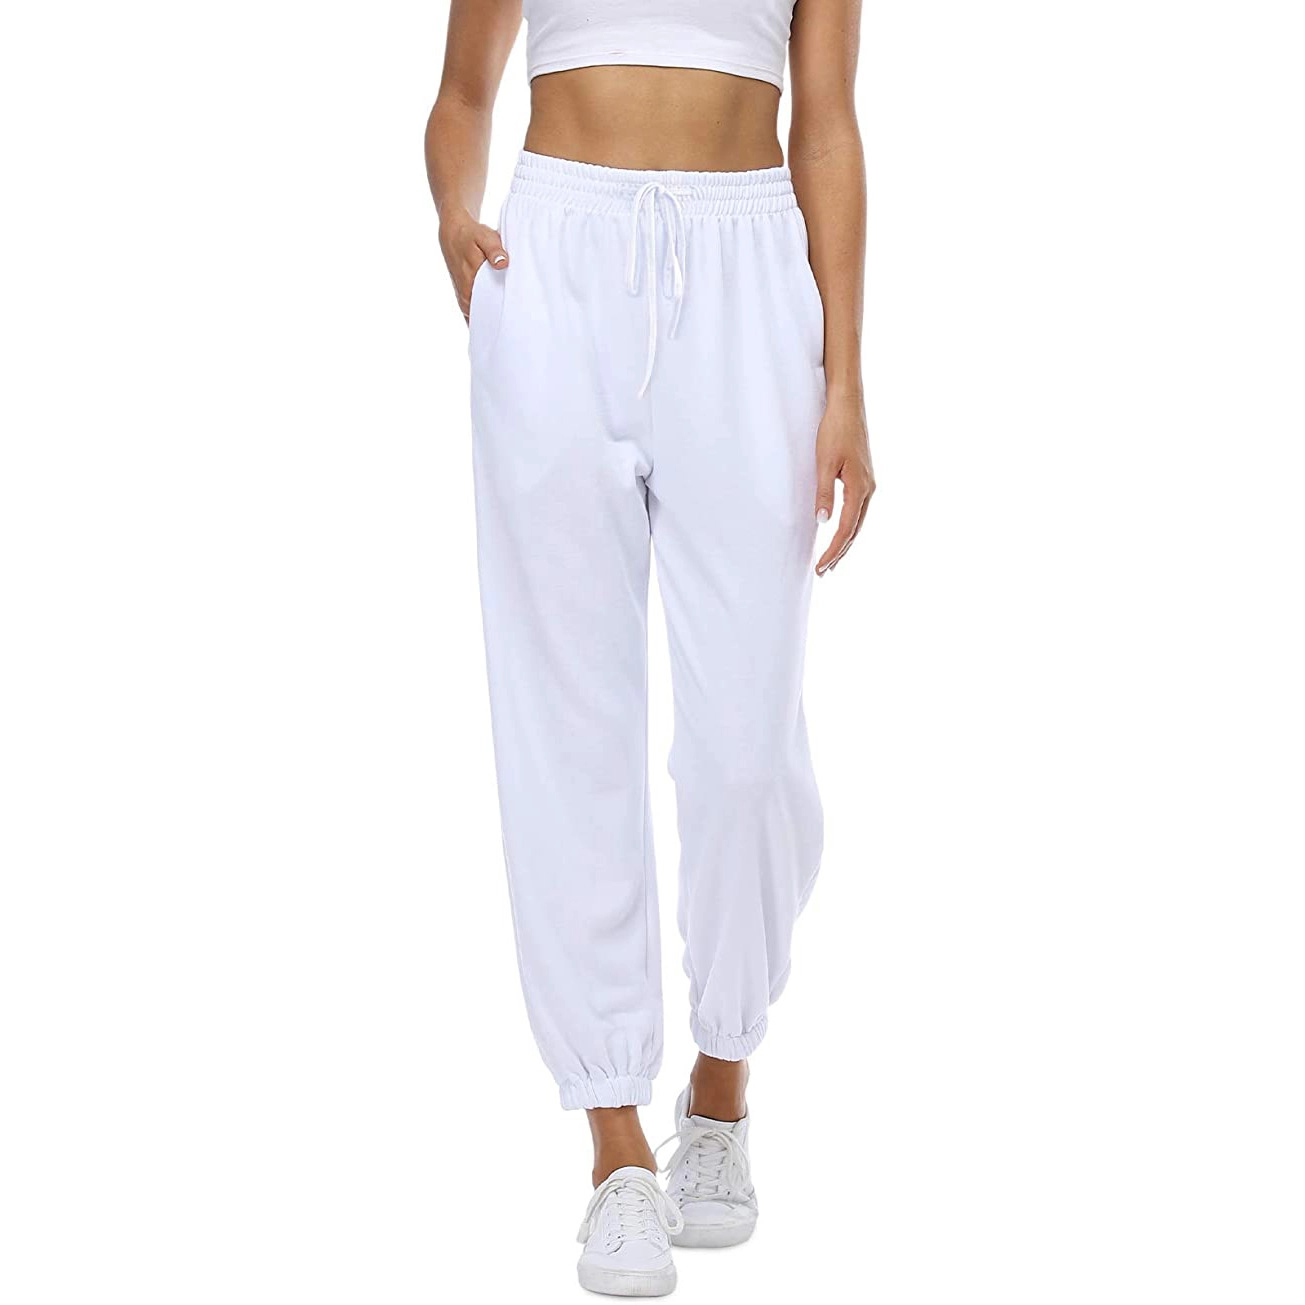 Women's Sweatpants High Waist Drawstring Joggers Athletic Pants with Pockets